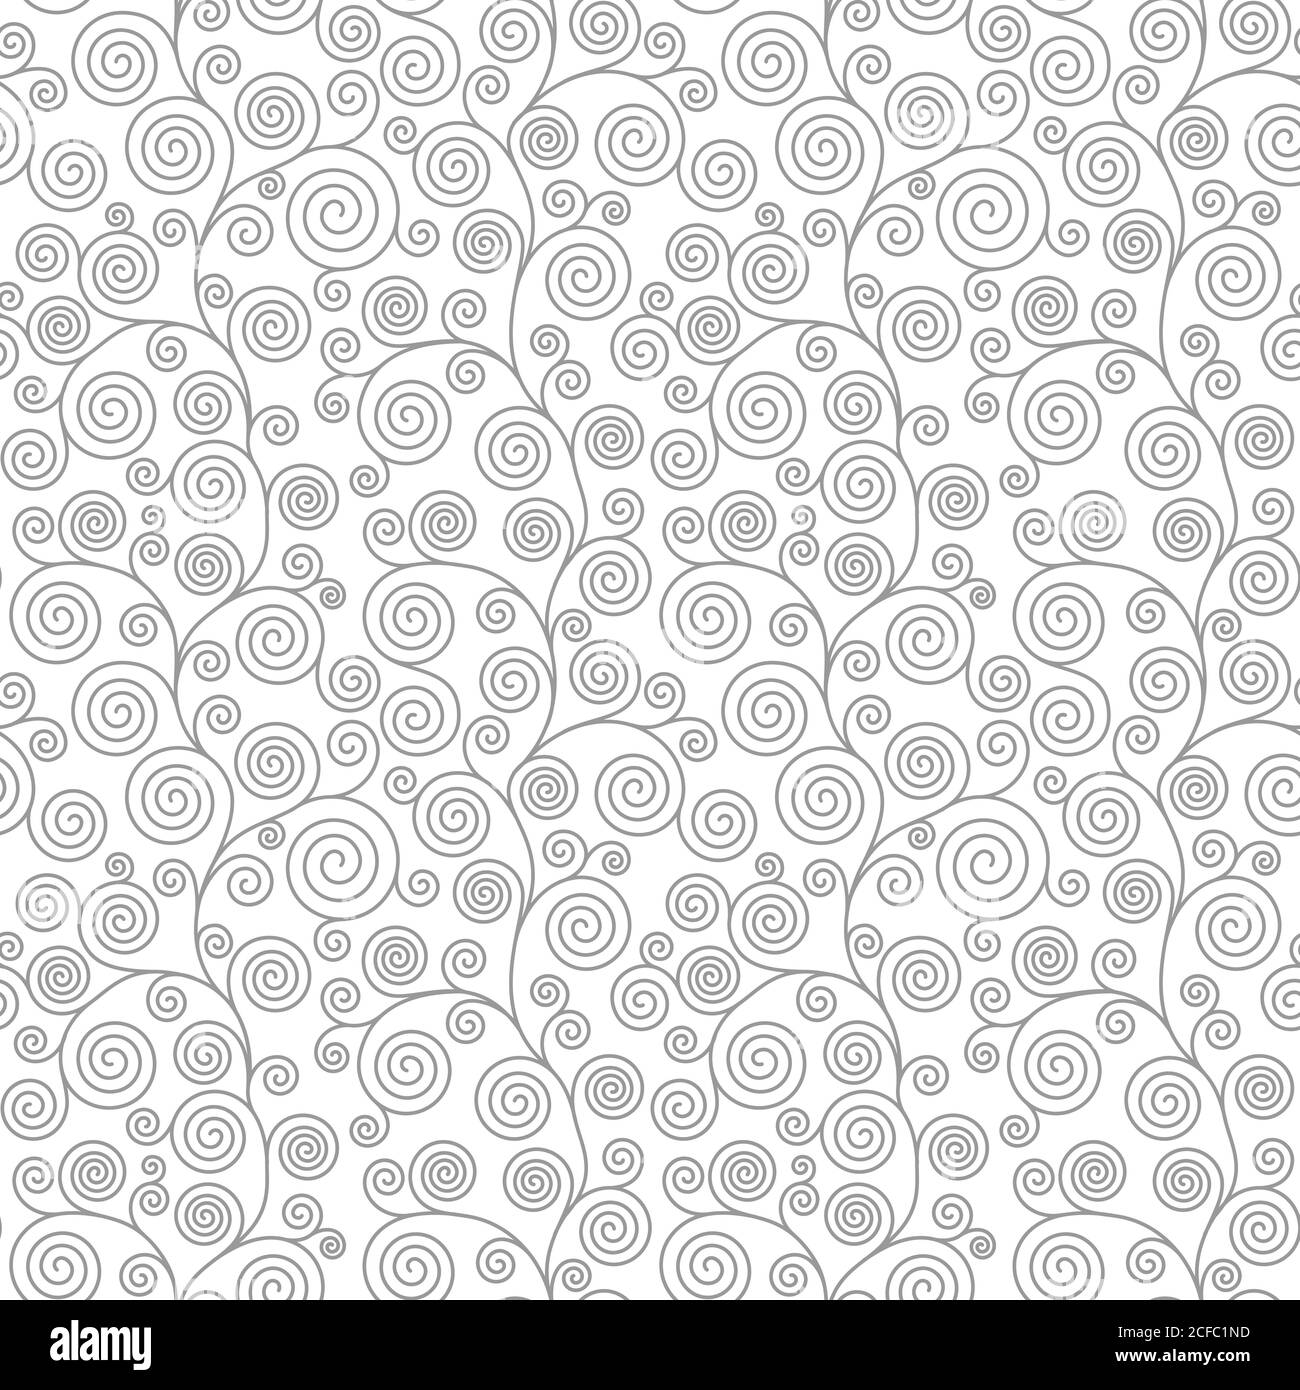 Seamless pattern with curvy spiral flourishes. Vector seamless background. Stock Vector